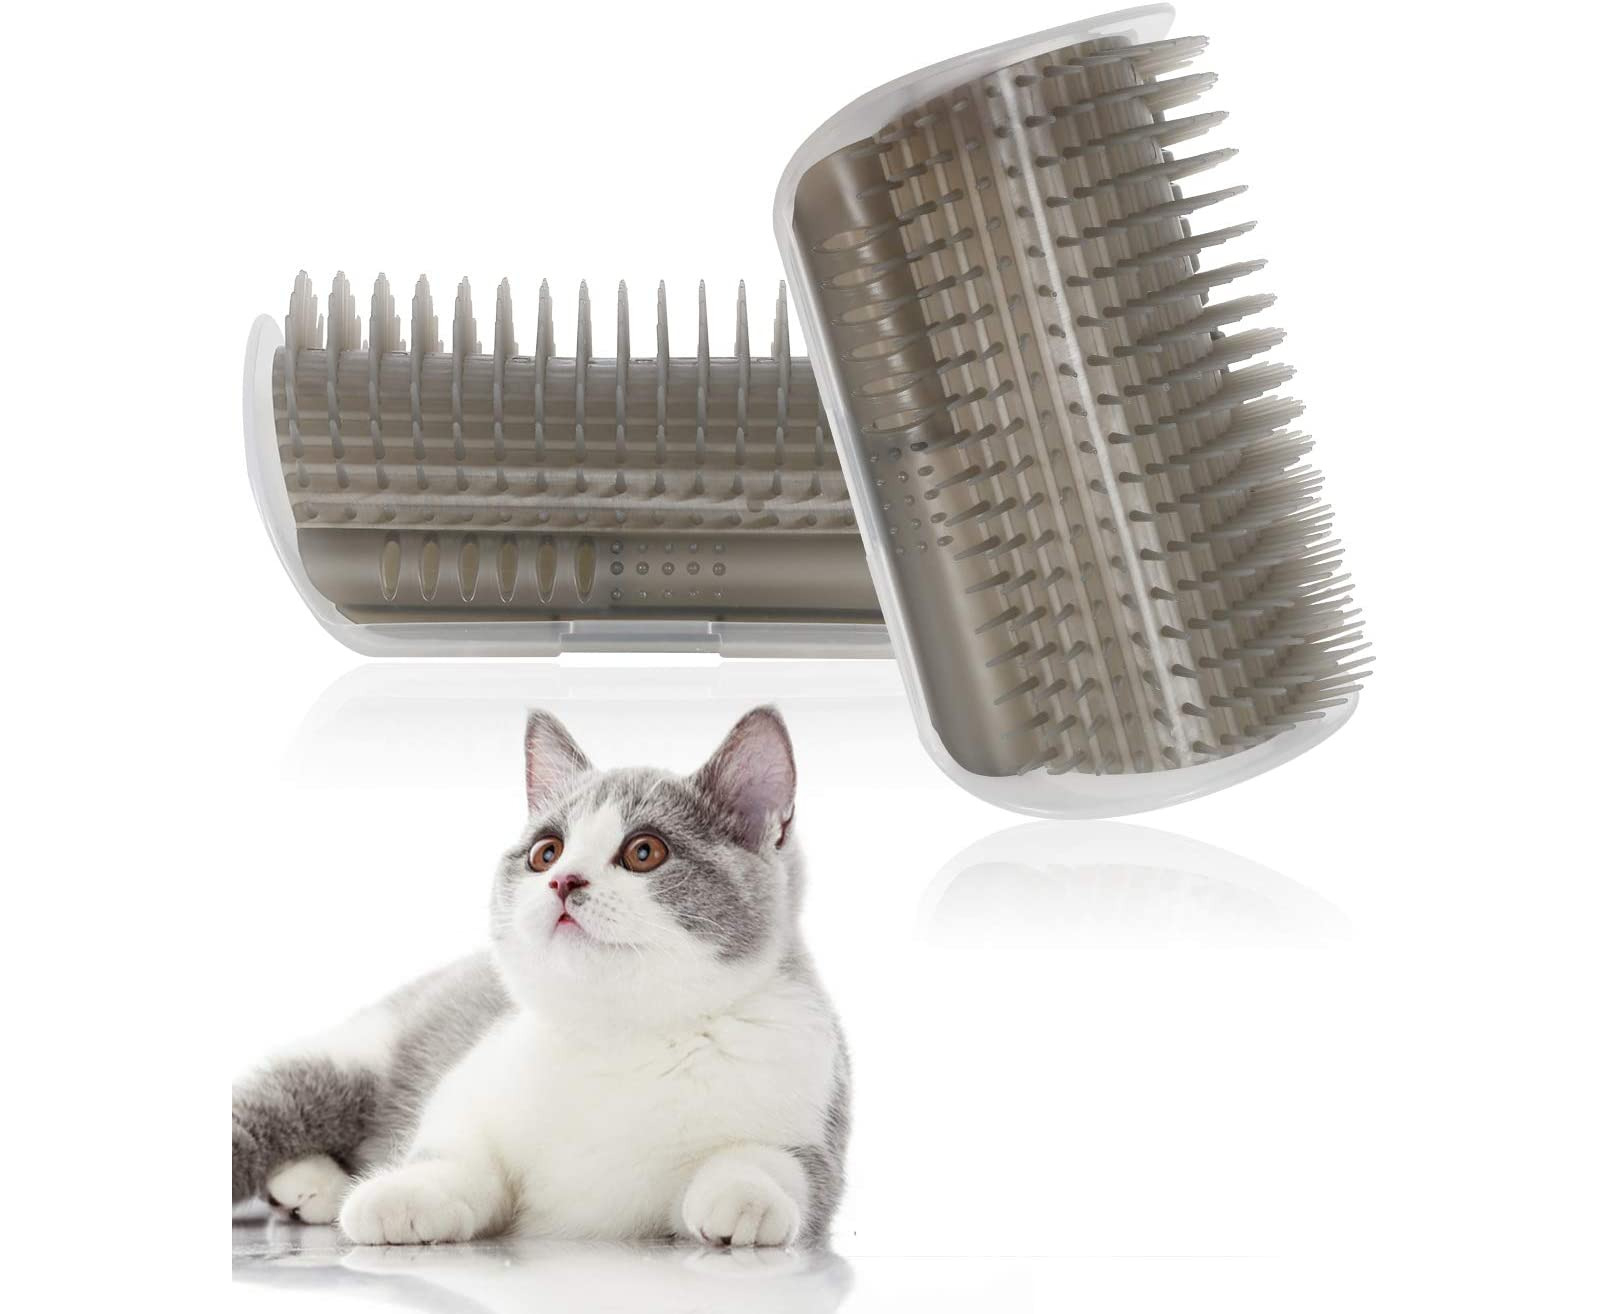 Cat Scratcher Comb Massage Toy with Catnip Pouch Kitten Massaging Wall Corner Mounted Massage Itching Tool for Hairballs and Shedding-Safe Cat Self Grooming Brush 